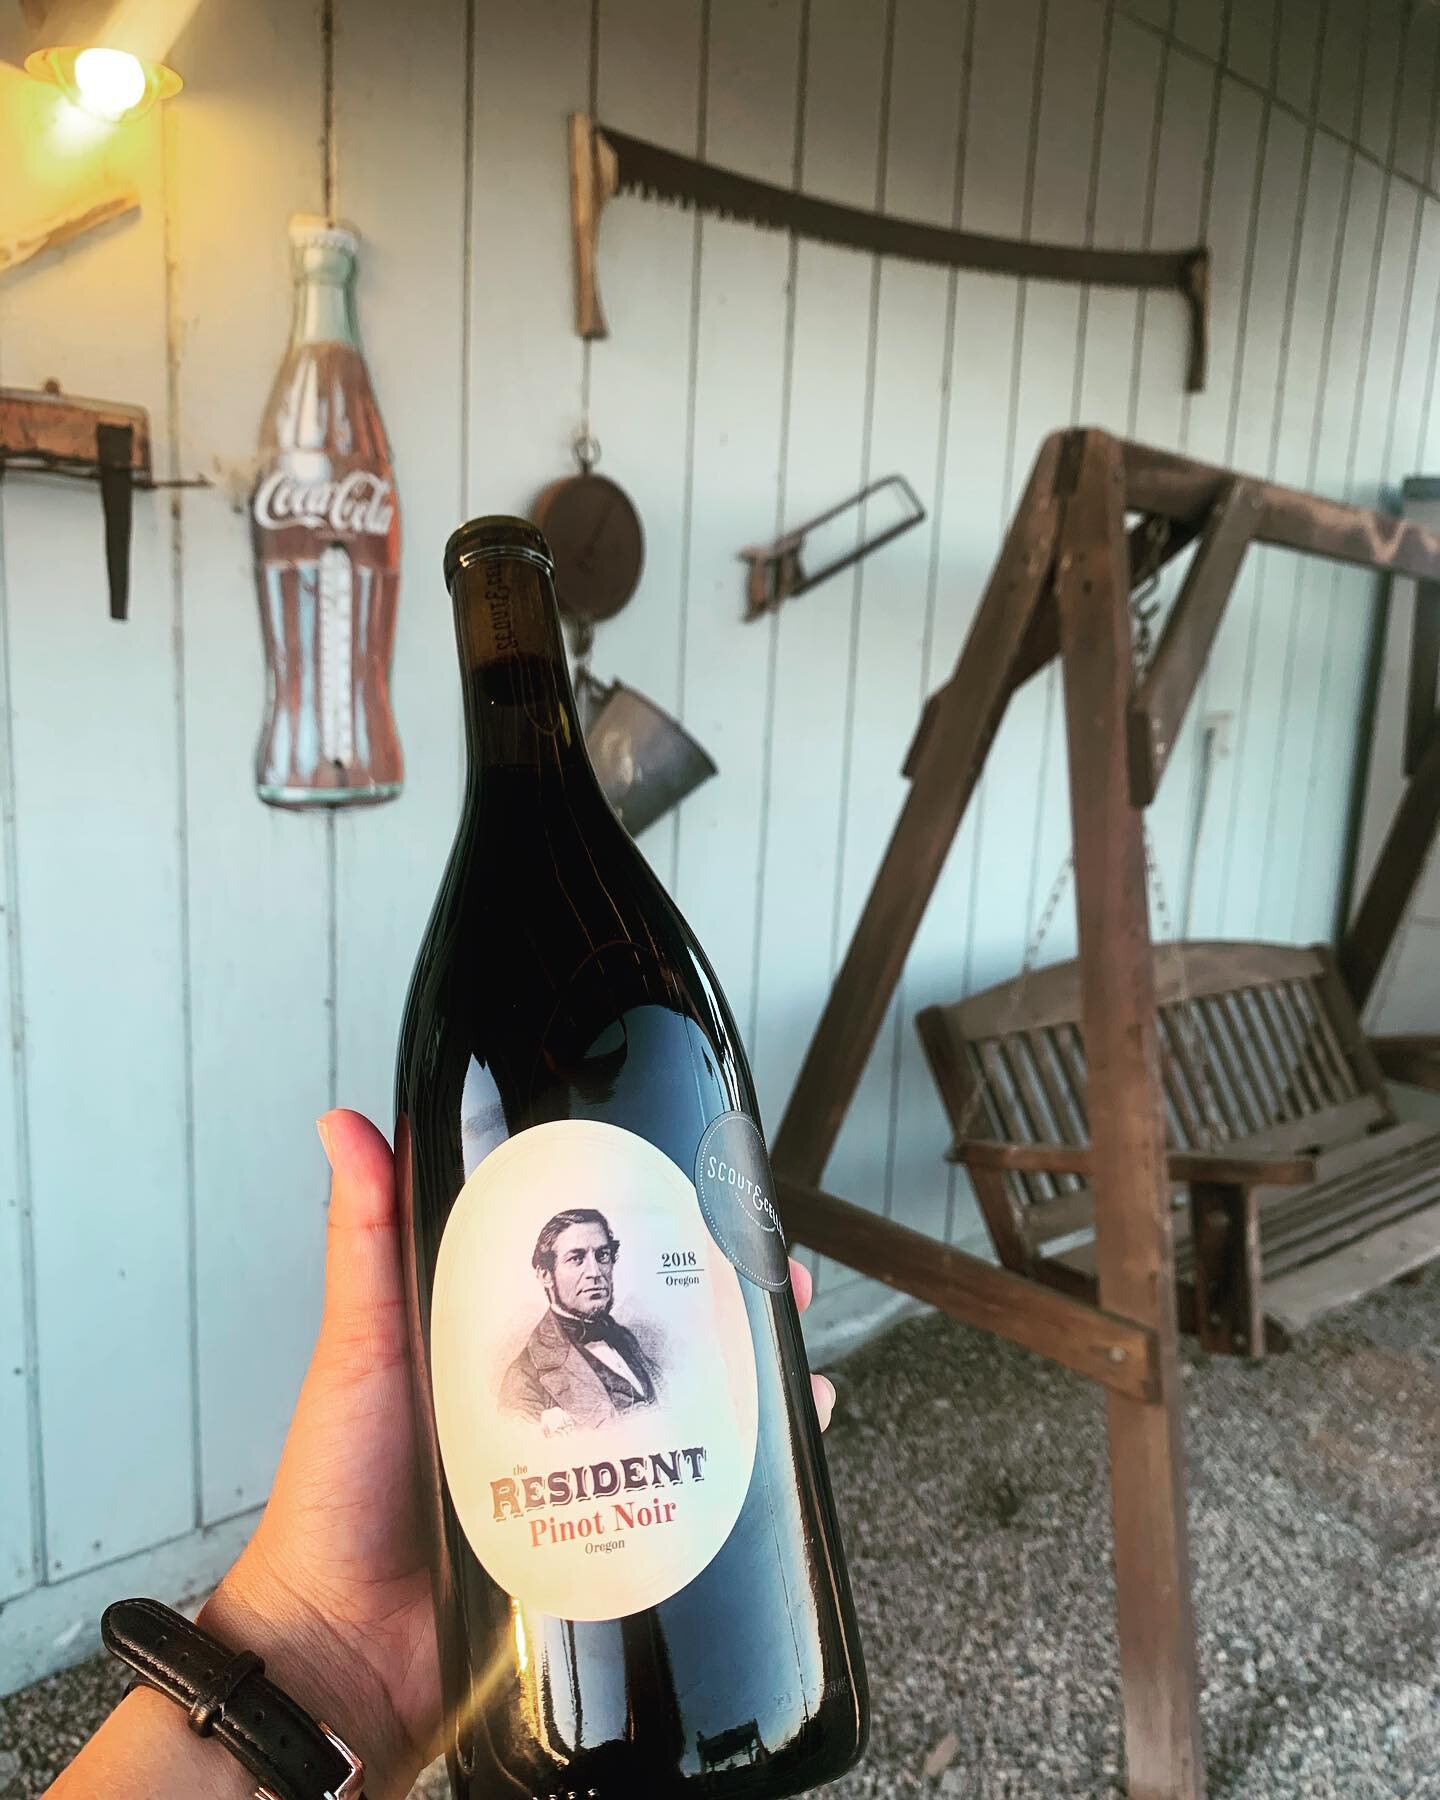 2018 Resident Pinot Noir for those sittin on the porch watching the sunset kinda nights. 
This Pinot Noir from Oregon smells like Earth and Tobacco while tasting like raspberry, cranberry, and clove... light tannins and a silky complexity that only W